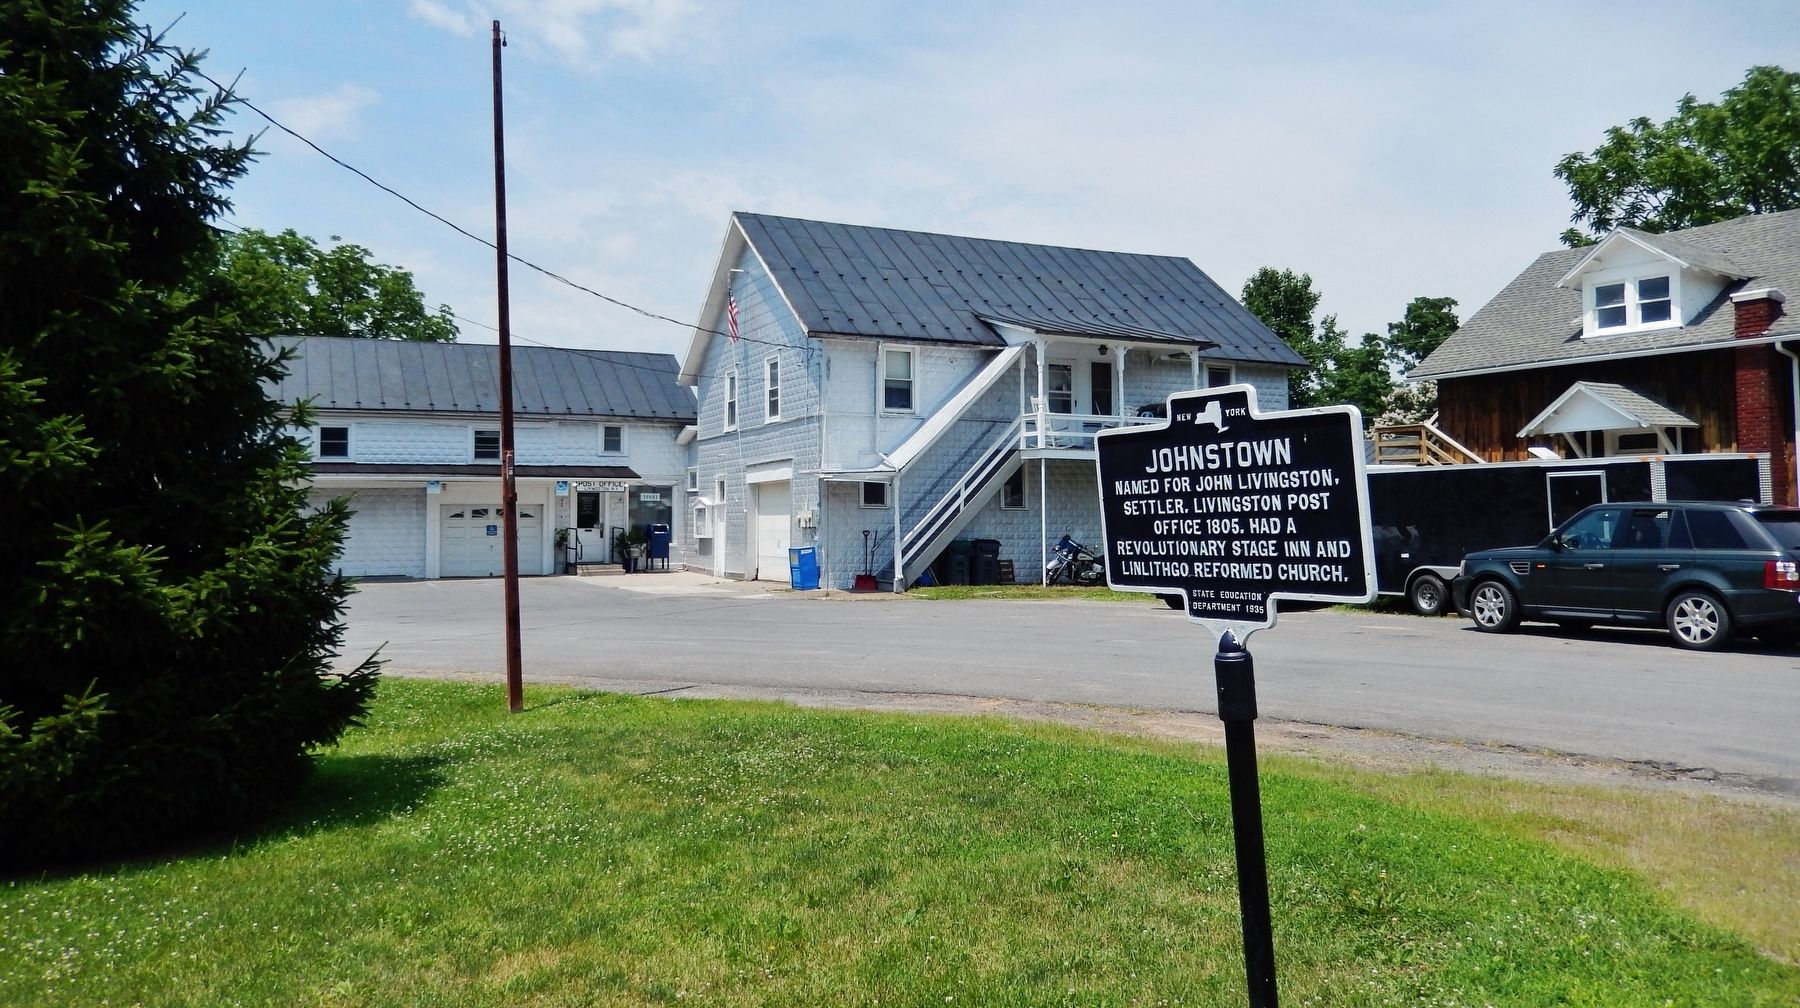 Johnstown Marker<br>(<i>wide view • Post Office and General Store in background</i>) image. Click for full size.